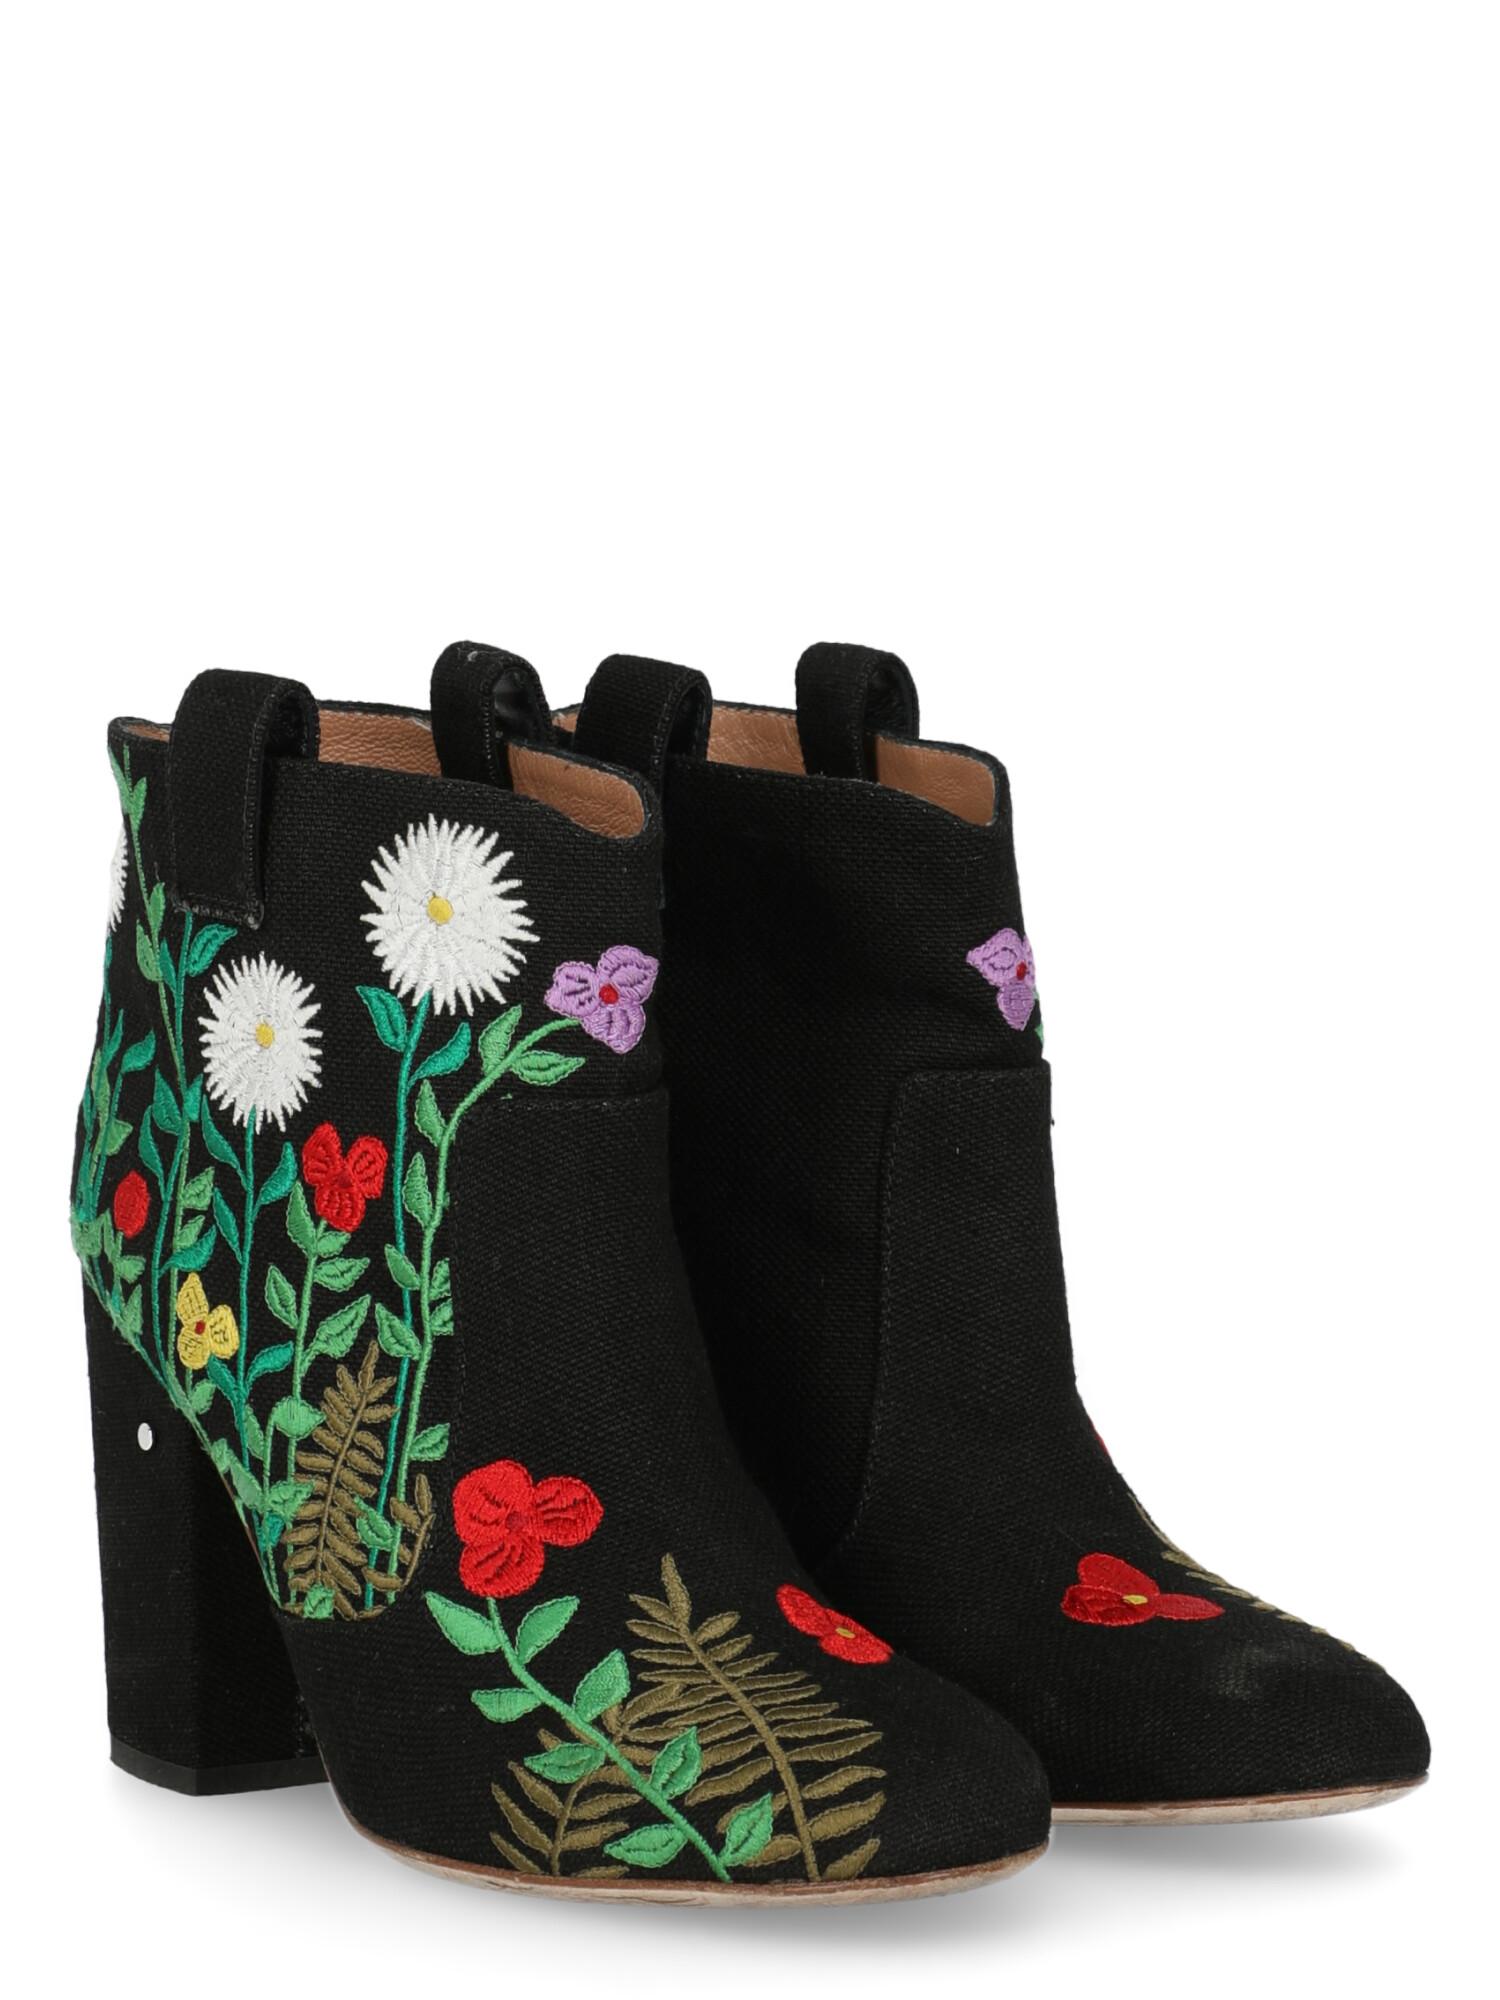 Product Description: Ankle boots, fabric, floral print, round toe, branded insole, block heel, high heel

Includes: N/A

Product Condition: Very Good
Heel: negligible marks. Sole: visible signs of use.

Measurements:
Height: 10